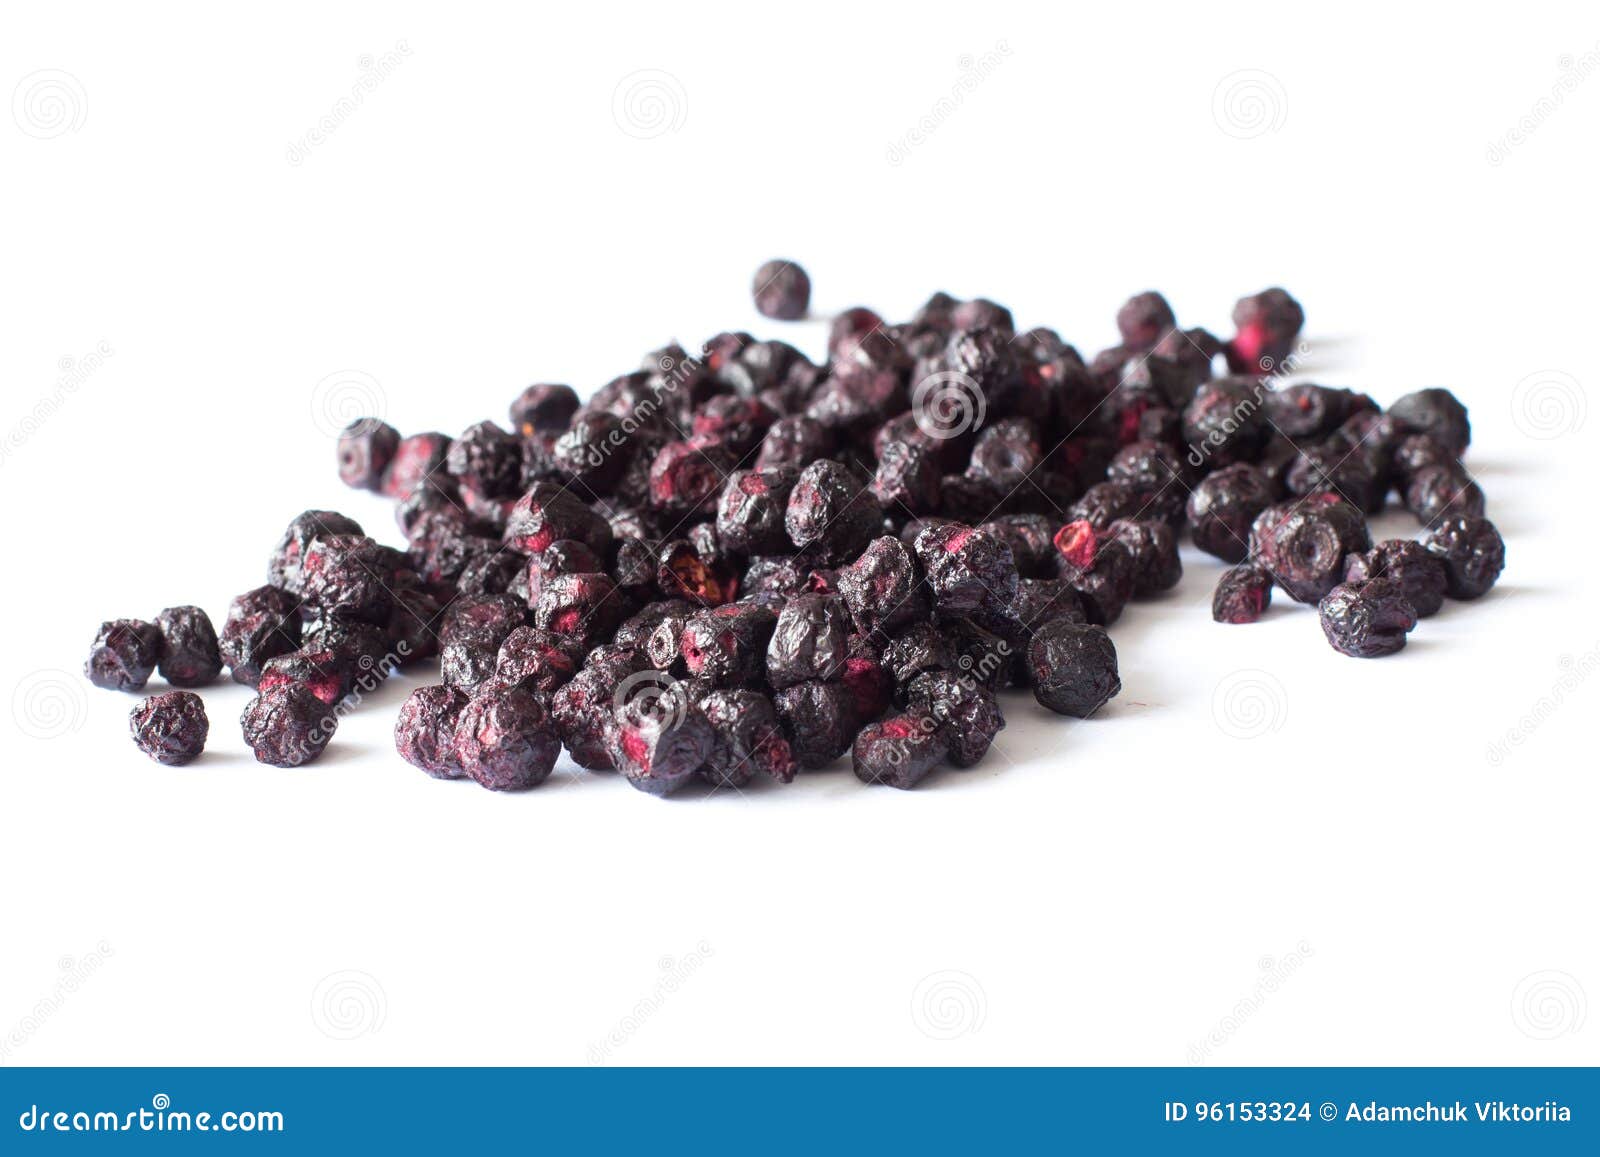 freeze dried blueberries on a white background.